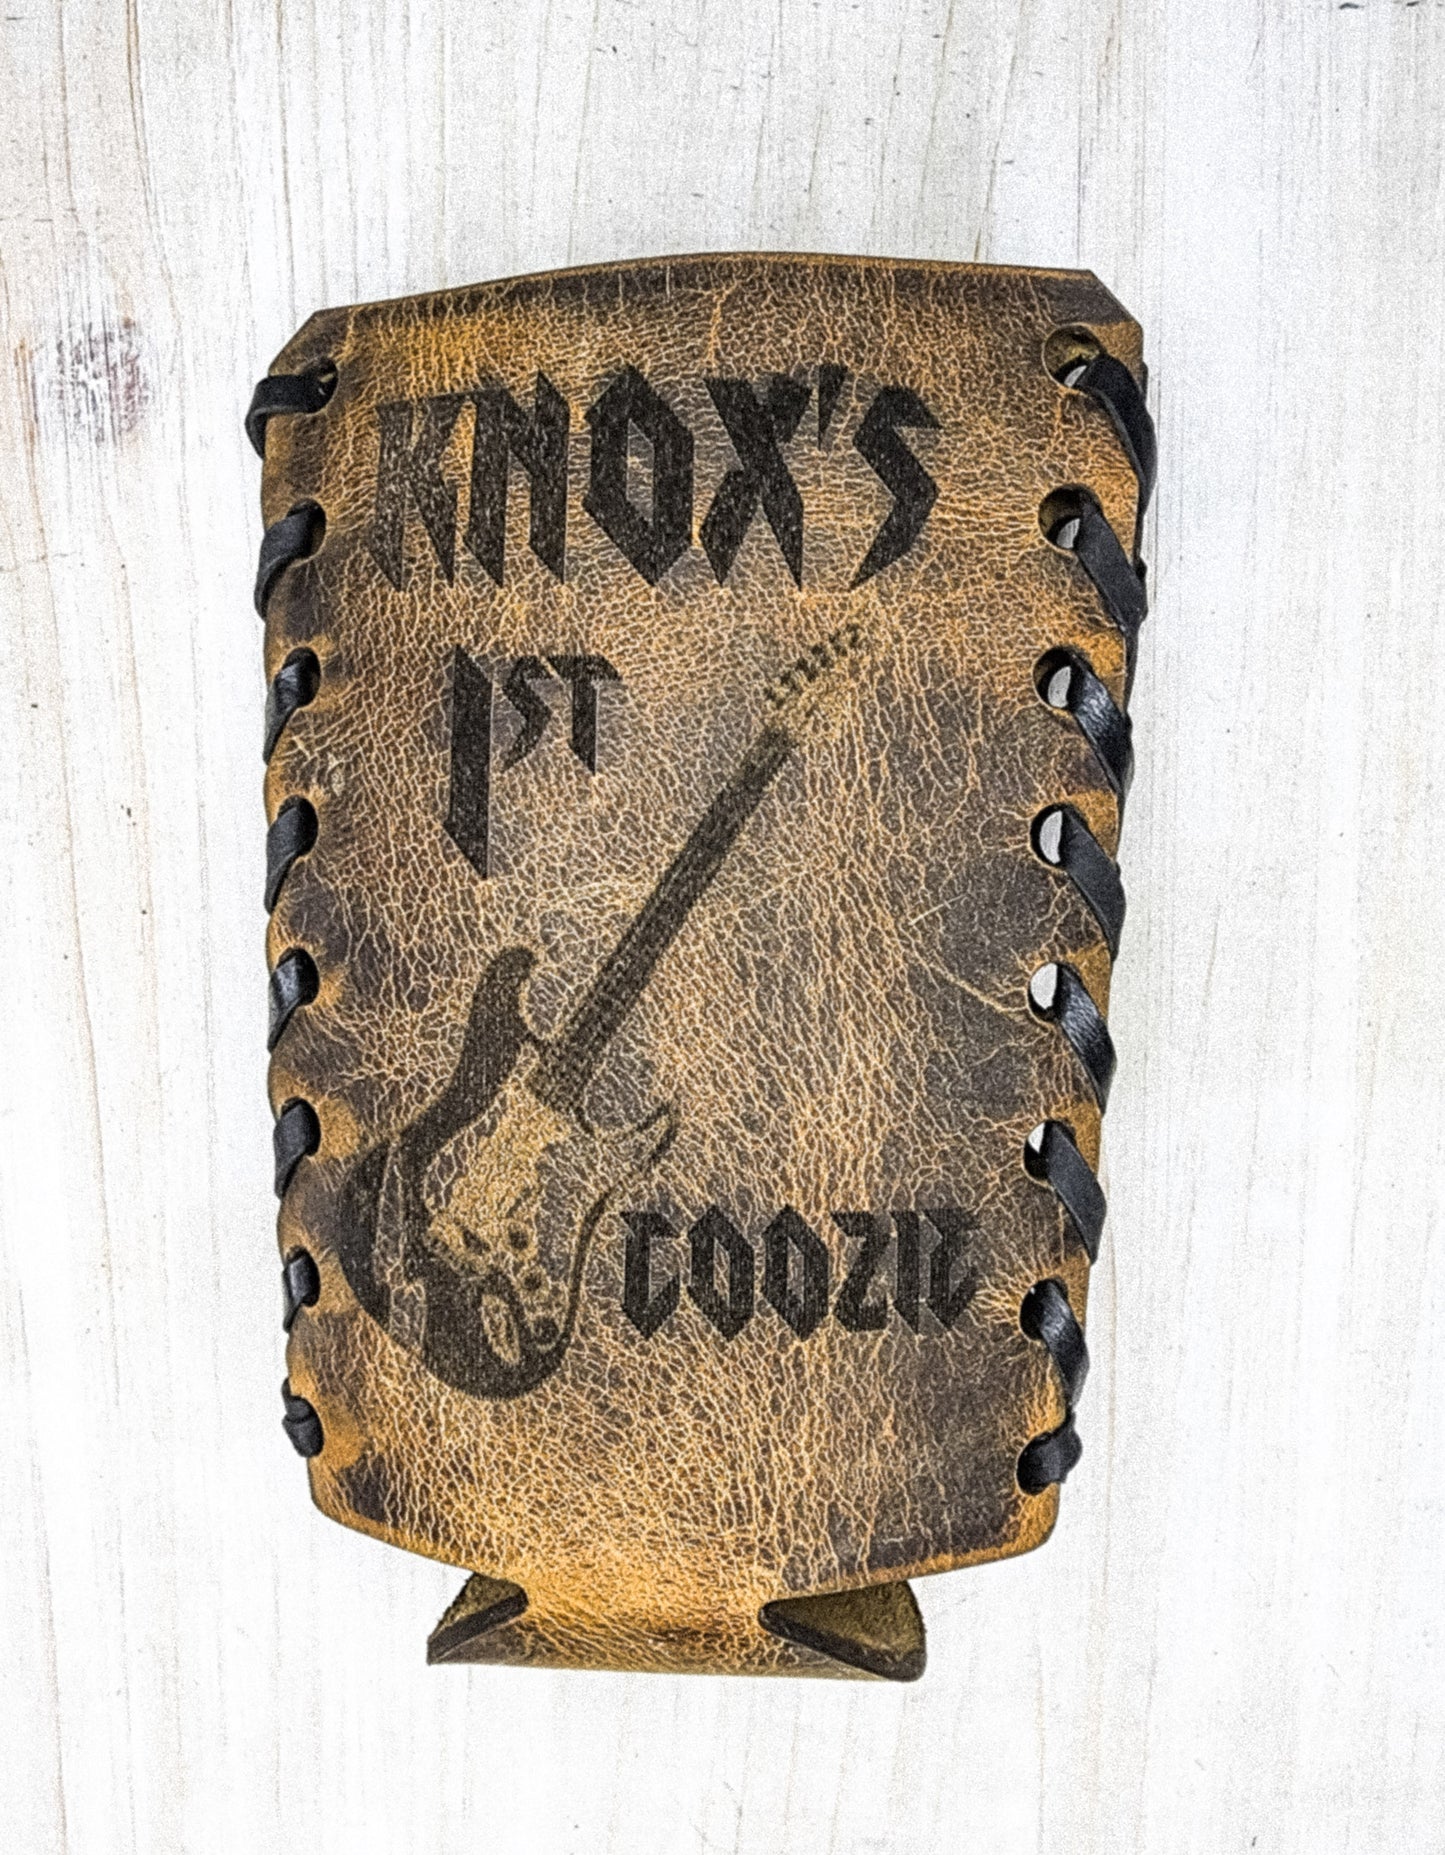 Personalized leather koozie for baby bottle wine flat says noxus first koozie with an image of a guitar unique baby shower gifts for boys